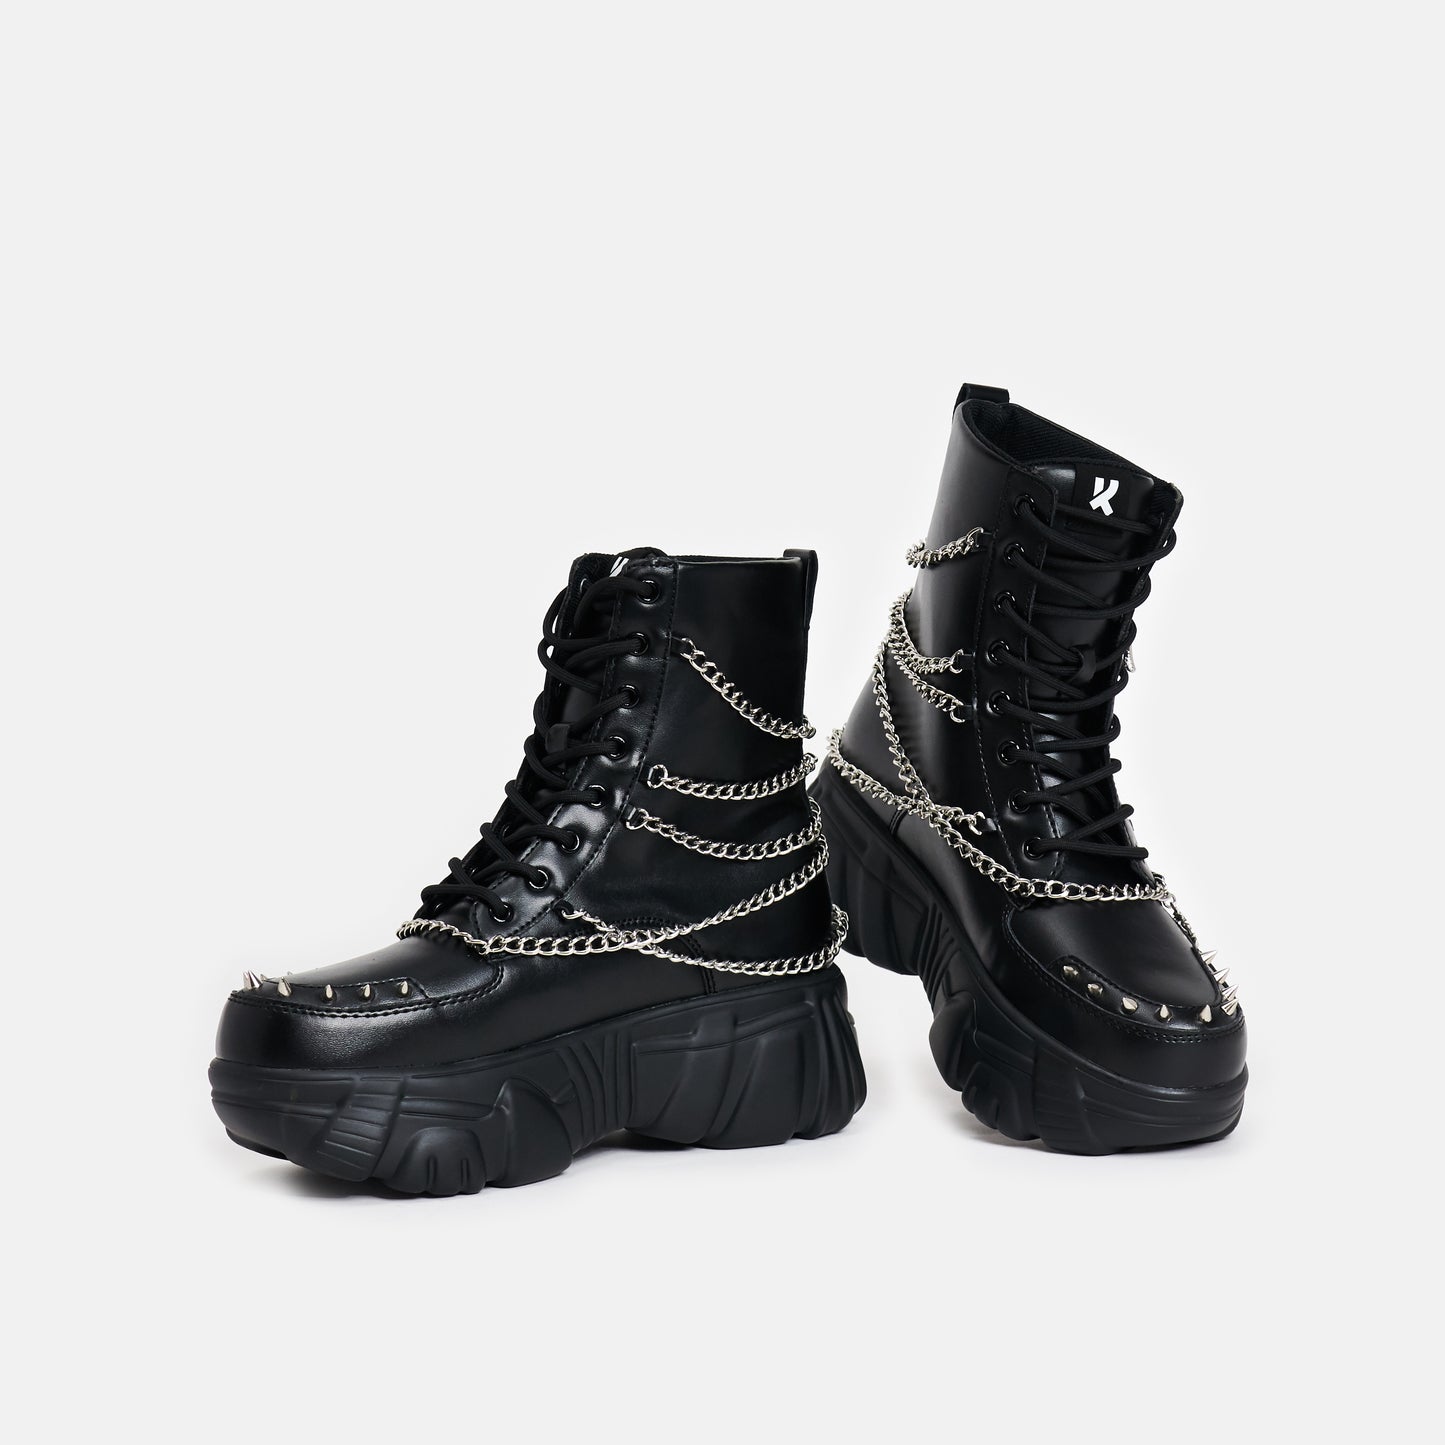 Boned Catch Black Mystic Charm Boots - Ankle Boots - KOI Footwear - Black - Front and Side View